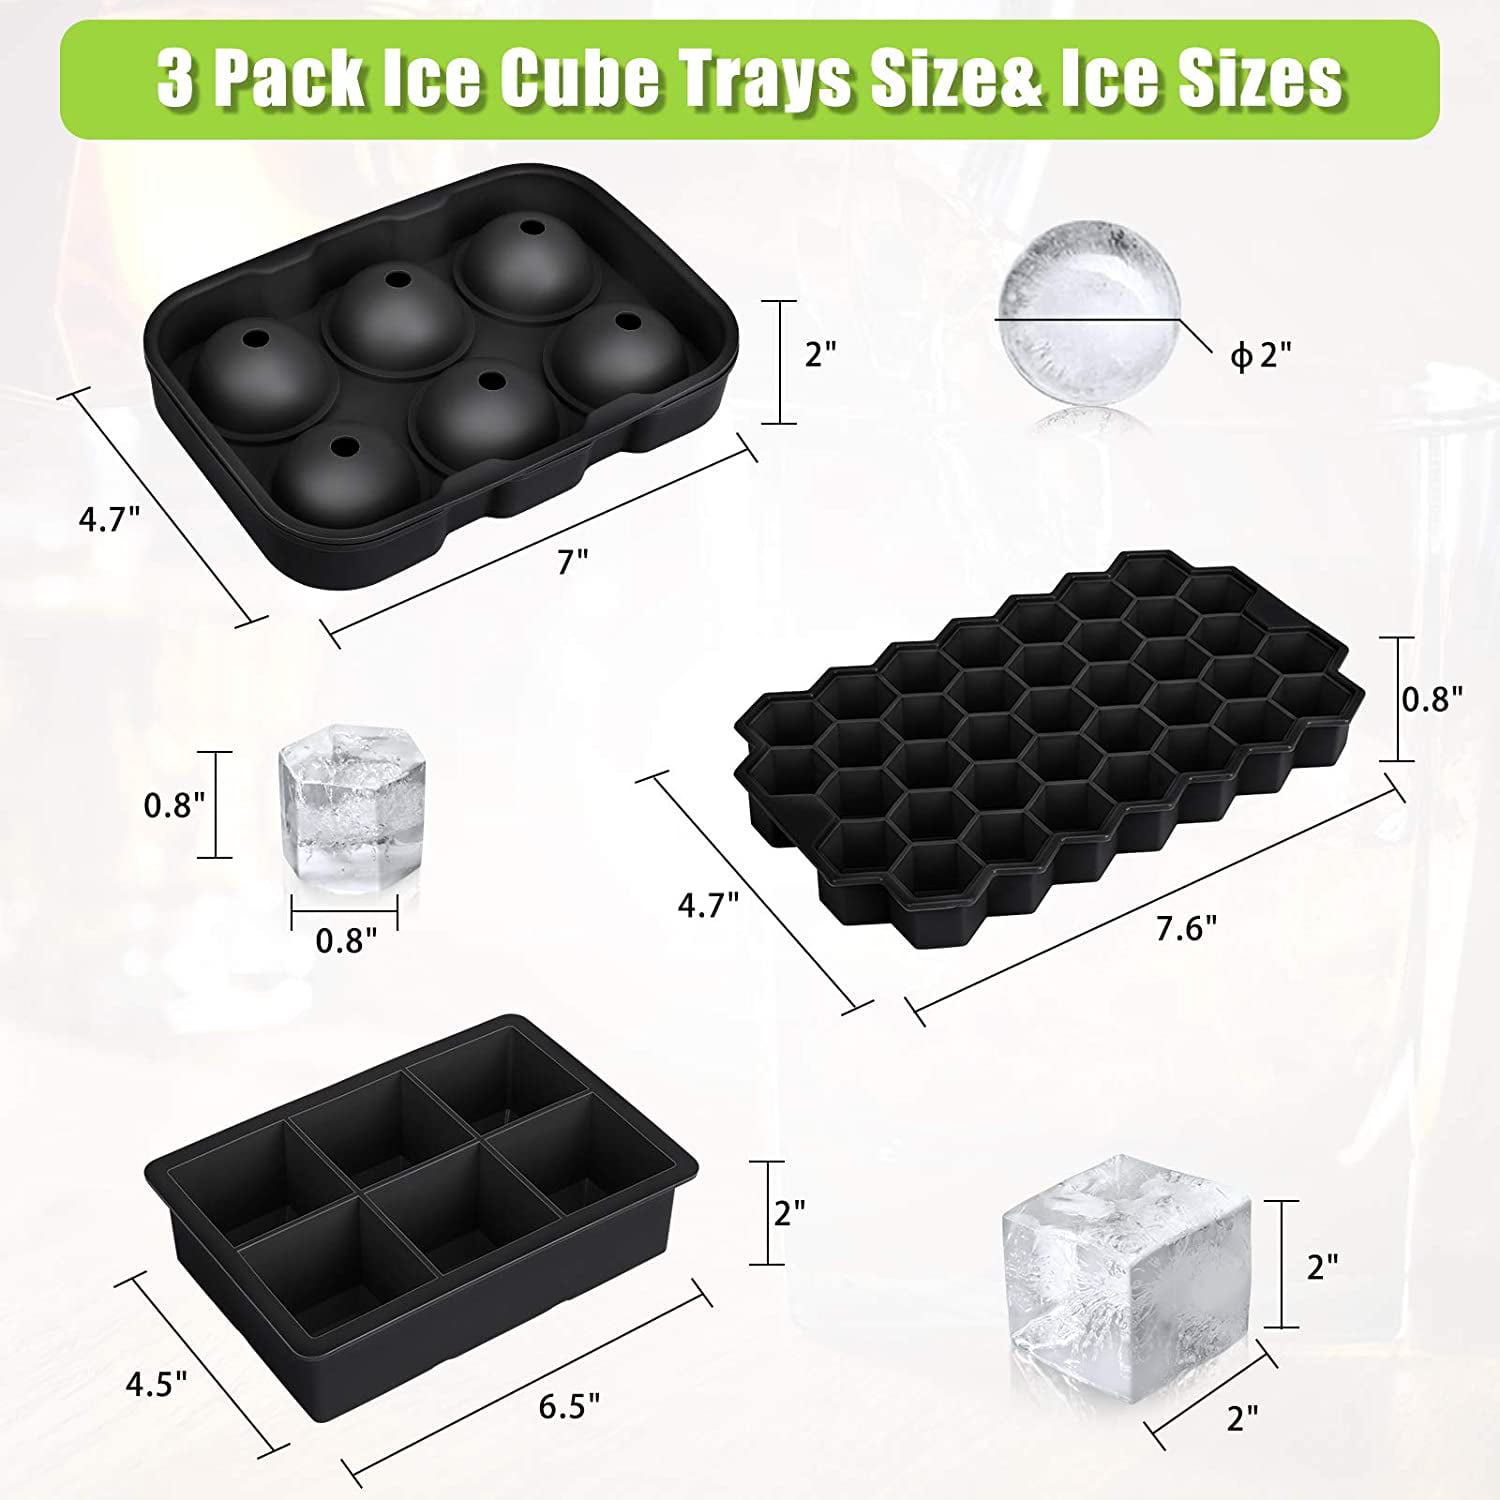 ALLTOP Large Square Ice Cube Trays,Giant Ice Block Maker with Lid for  Whiskey, Cocktails,Reusable Silicone Mold, DIY, BPA Free,Freezer - 2  Packs,Black